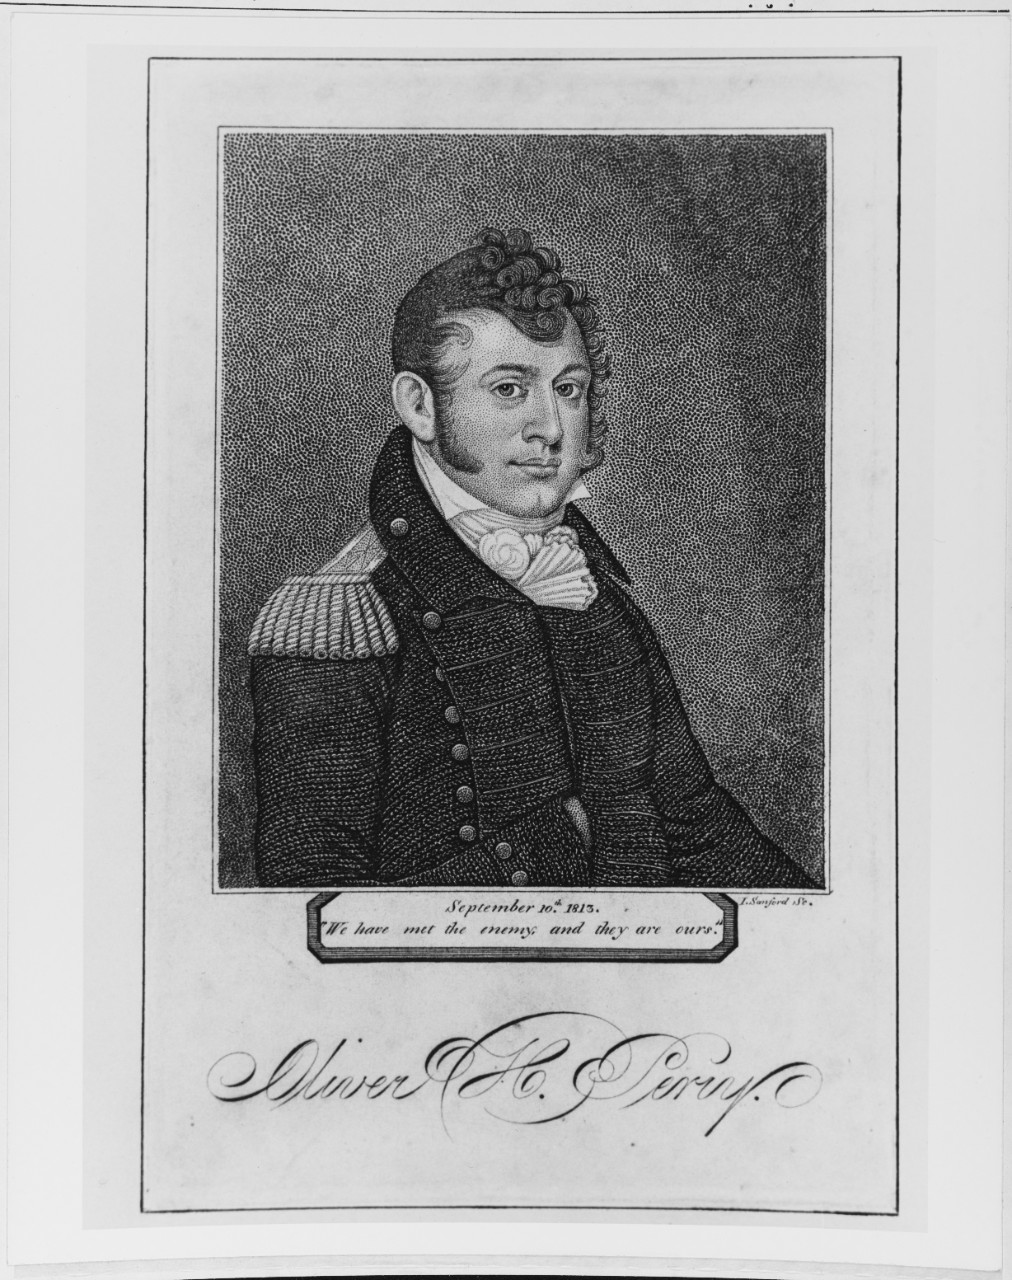 Engraving of Como. Oliver H. Perry, USN, by I. Sanford, St. Born South Kingston, R.I., 23 August 1785. (Naval History and Heritage Command Photograph NH 66660)